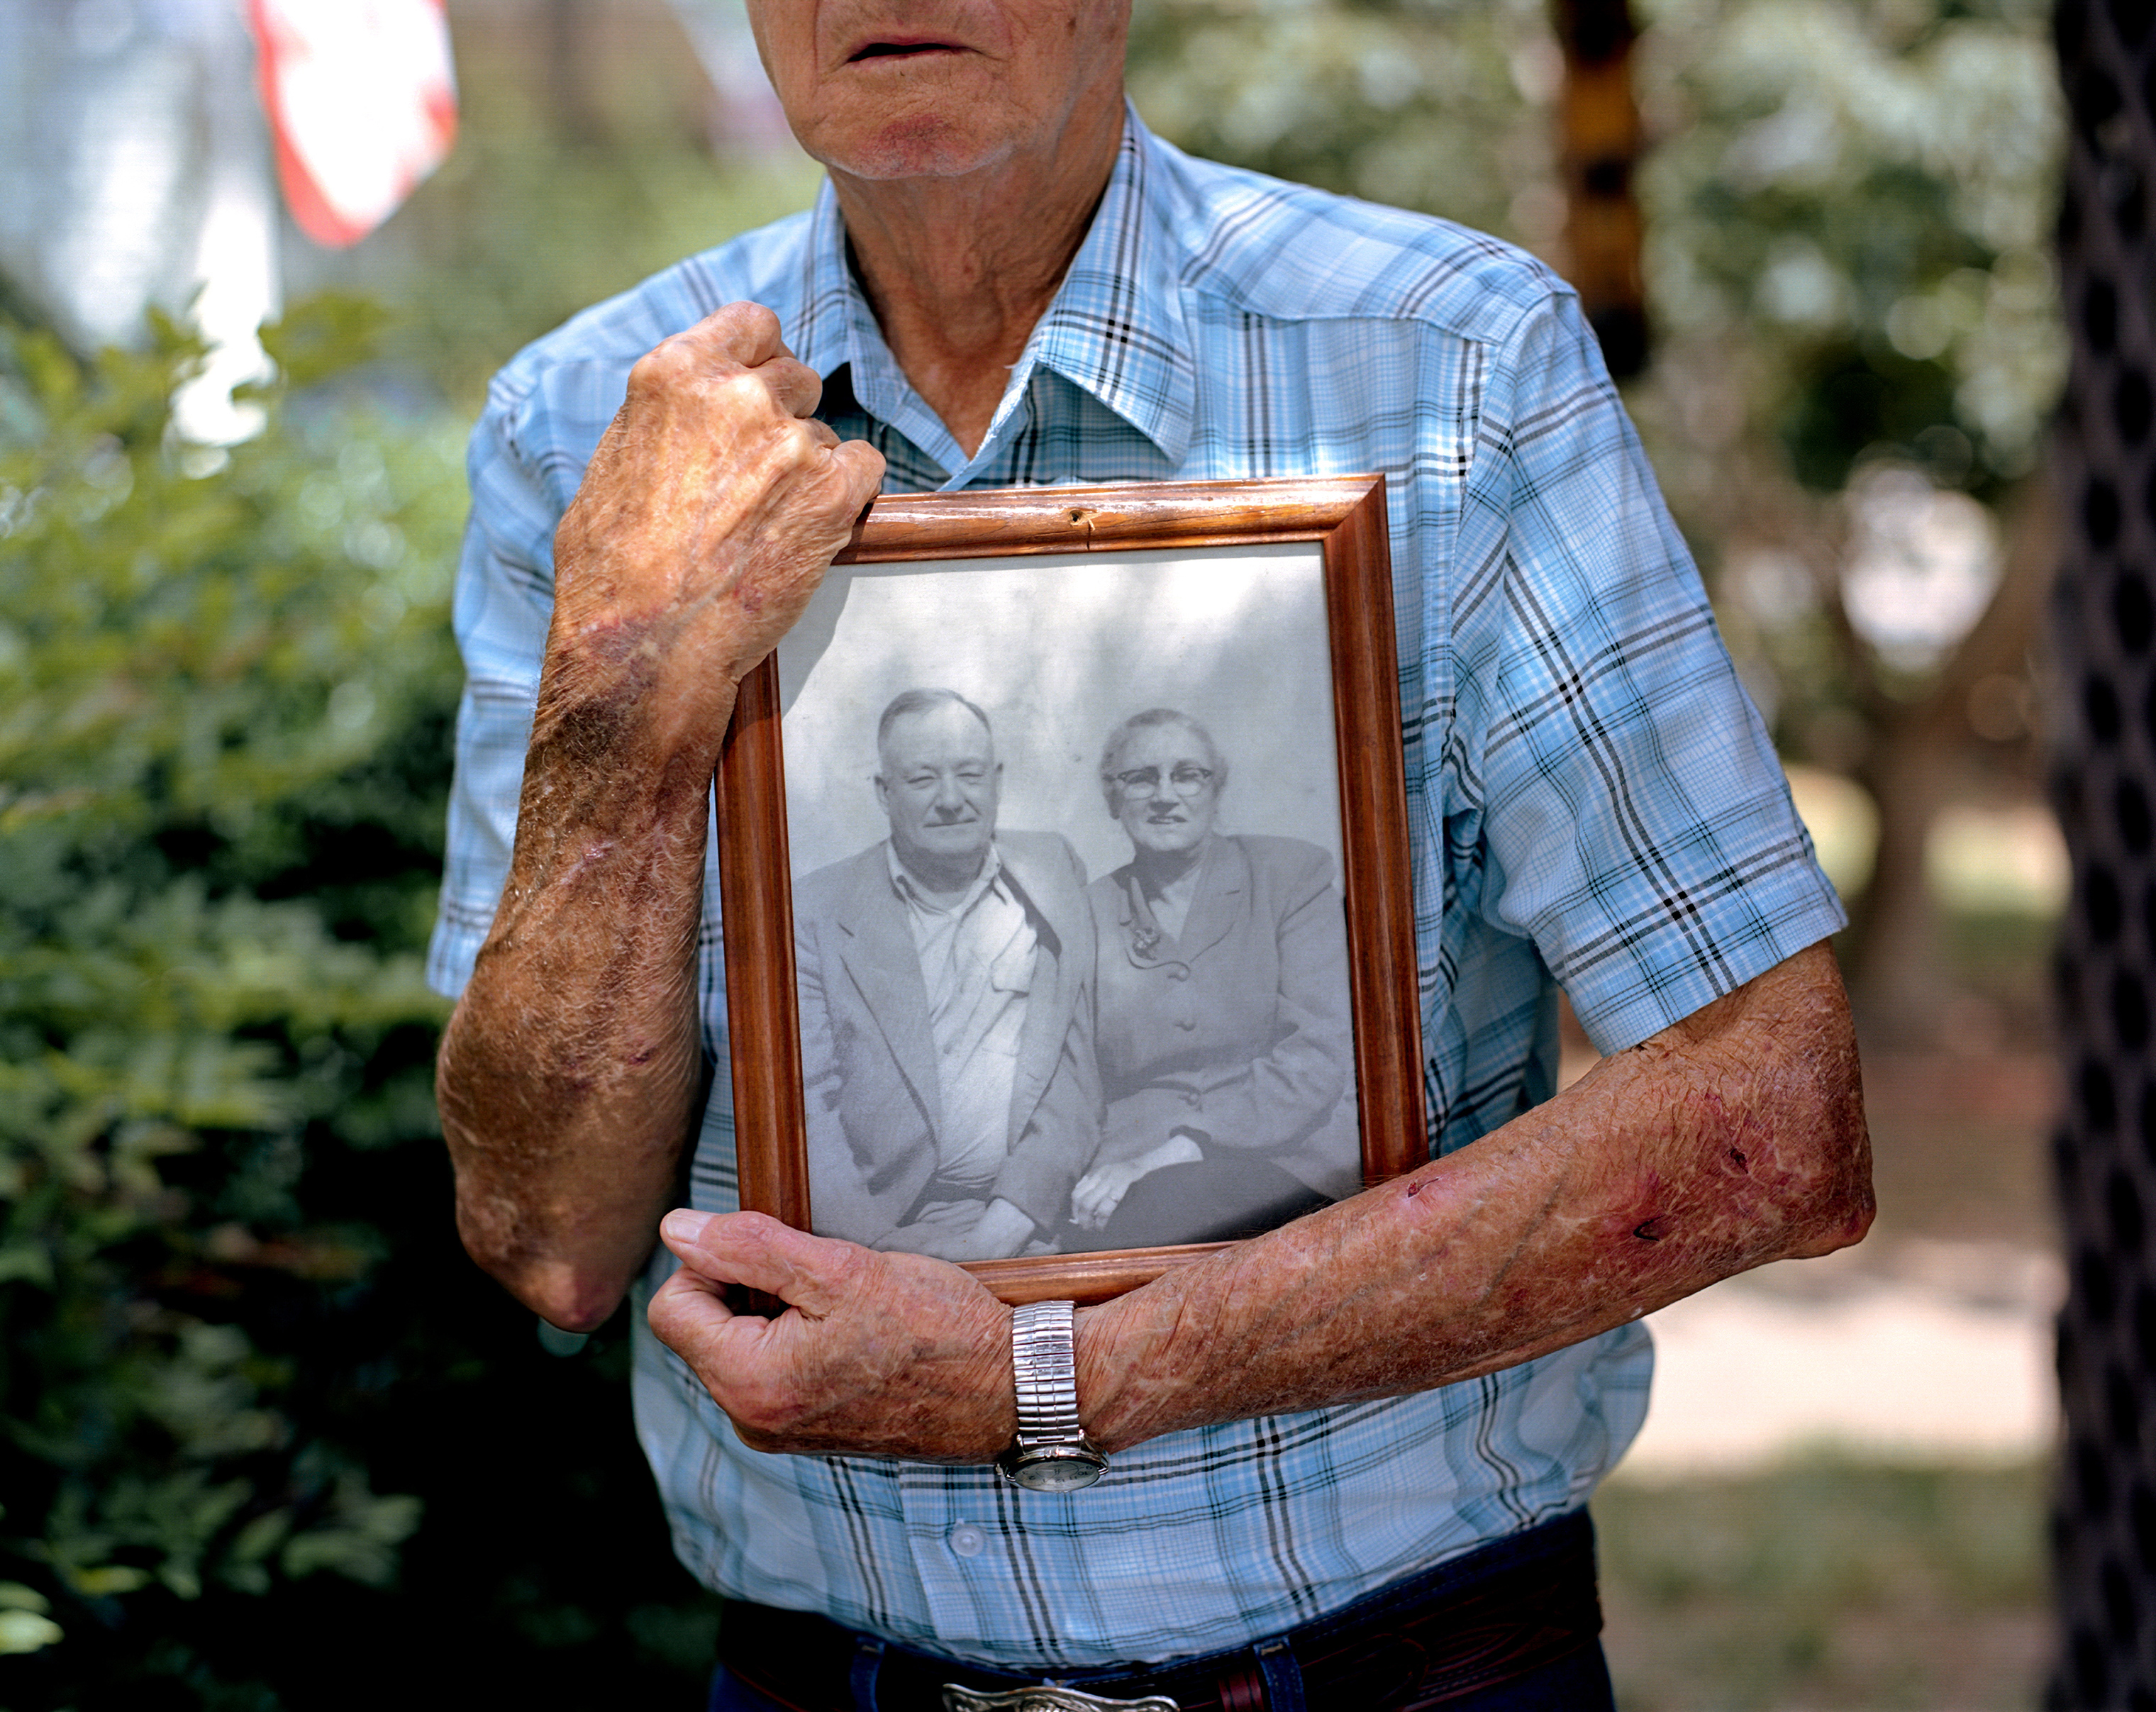 Gene Bowen holds a photograph of his parents at his home in LaGrange, Ga. Bowen was six years old when he awoke on a Sunday morning in 1940 to find his parents outside the home attending to a young African-American man, Austin Callaway, found bleeding to death on their property. The family wrapped the unconscious man in a bed sheet and rushed him to the local hospital, where he succumbed to his wounds. Callaway had been arrested the evening before. An armed group of hooded men snatched him from police custody without resistance, drove him to the edge of town, shot him multiple times and had left him to die. (Johnathon Kelso)